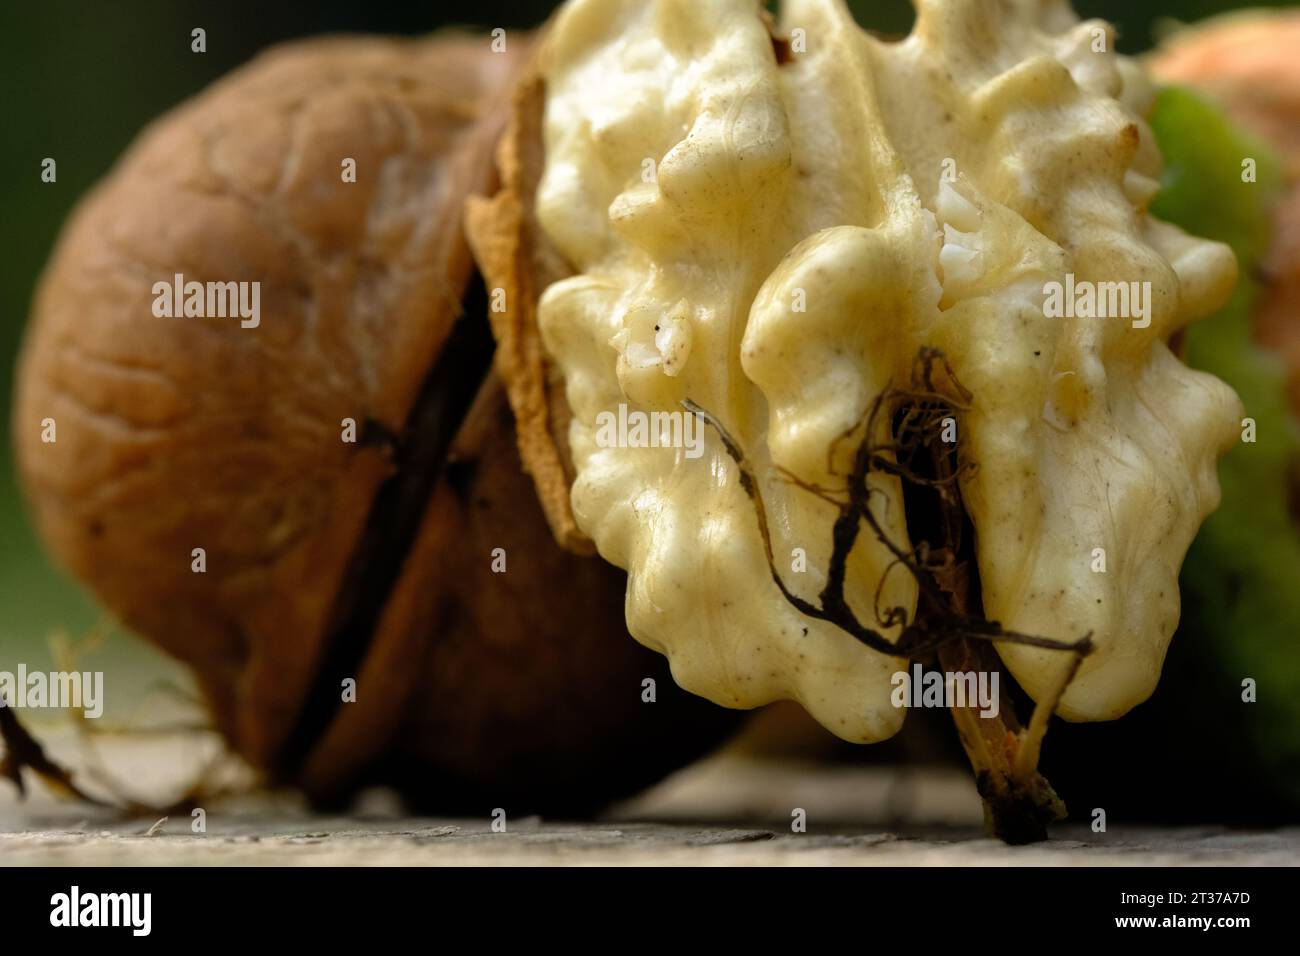 A close-up shot of two walnuts Stock Photo